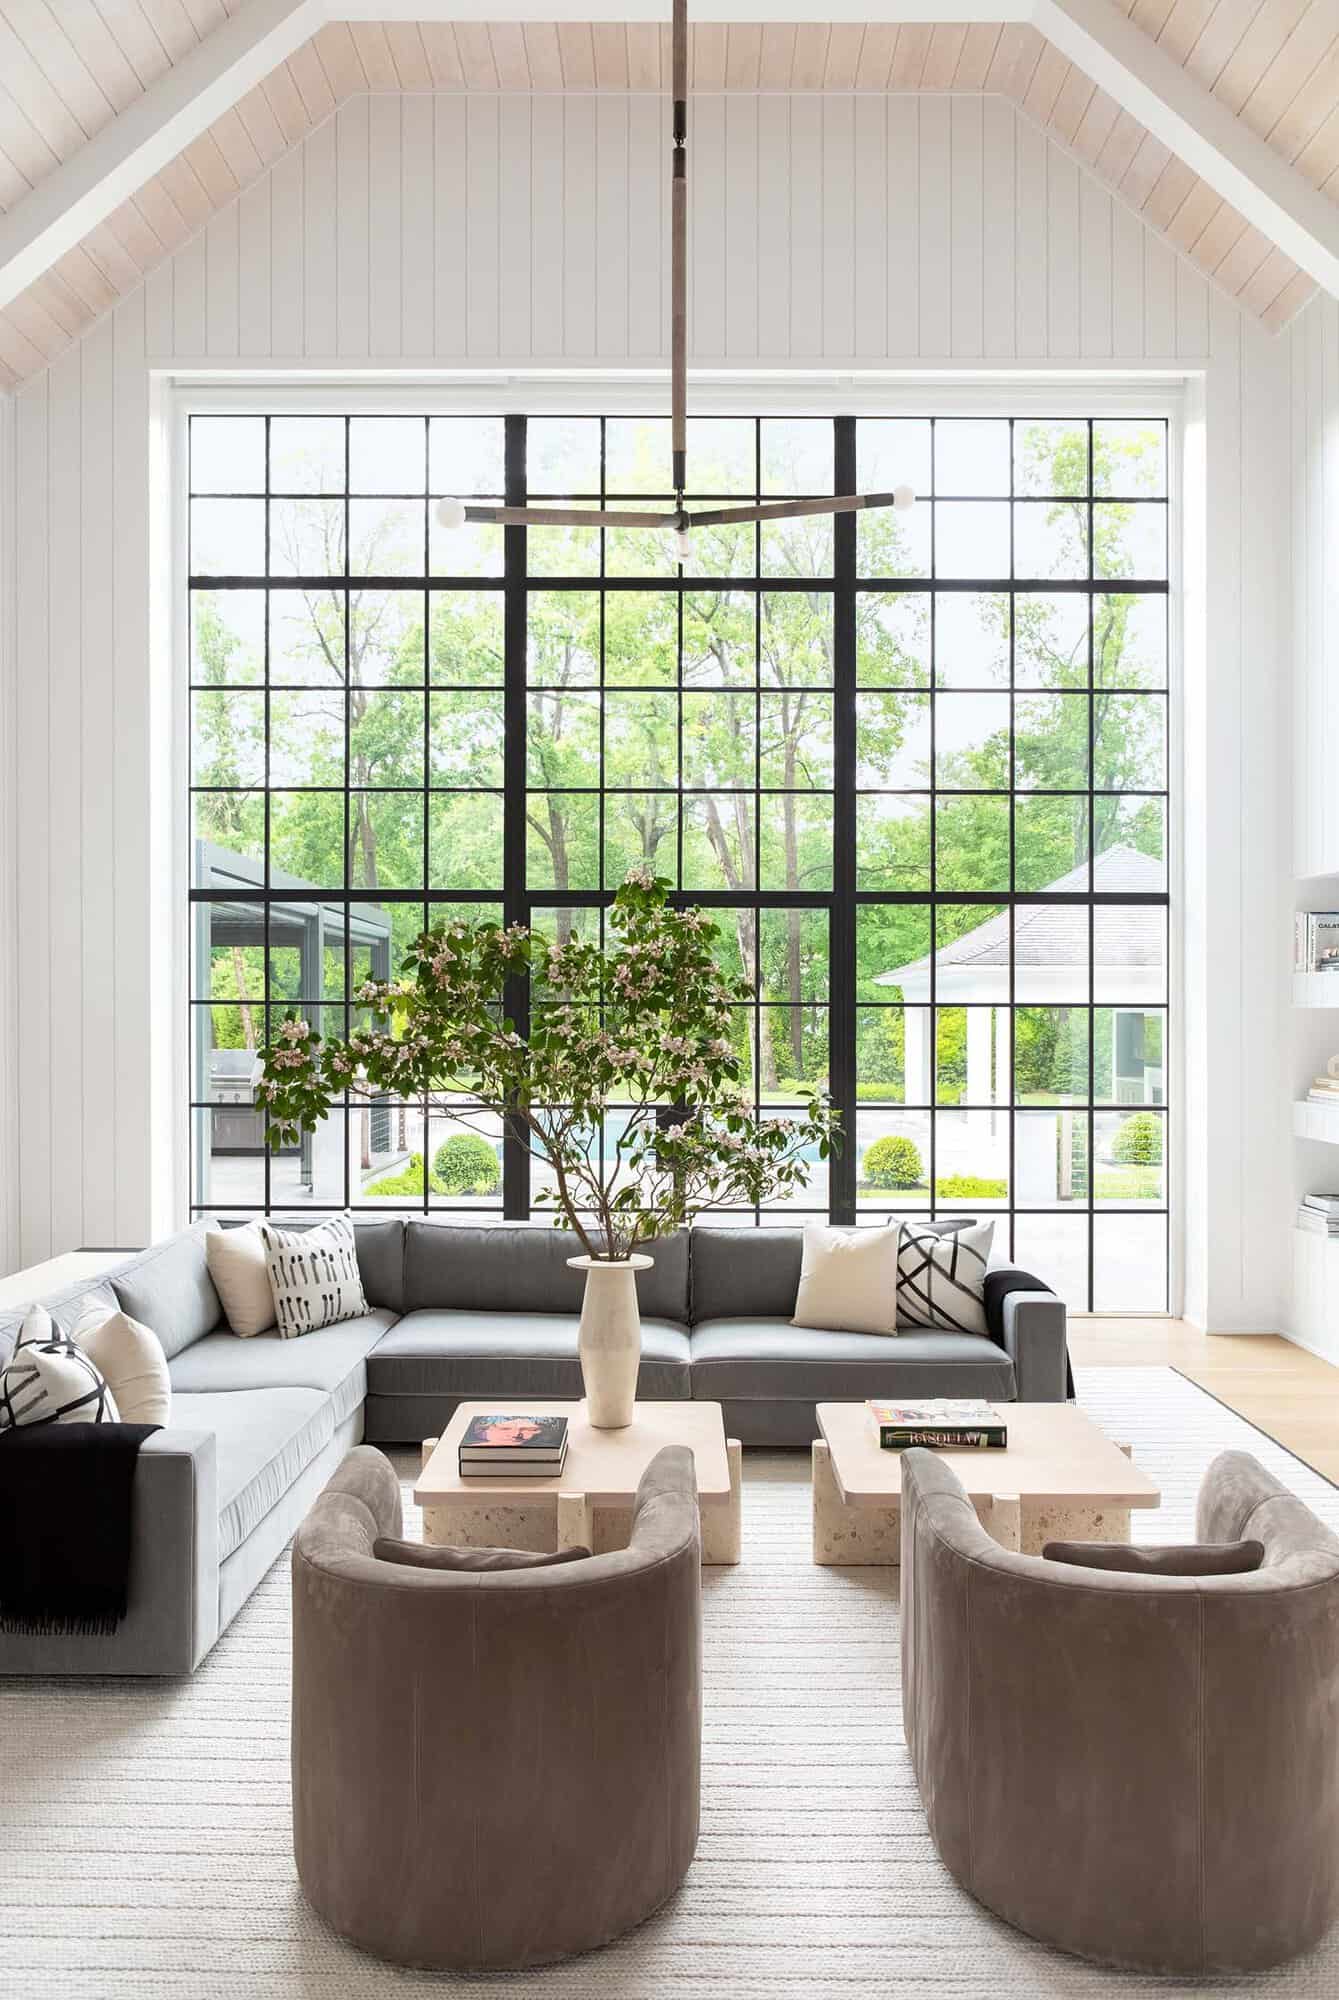 transitional style living room with floor-to-ceiling windows